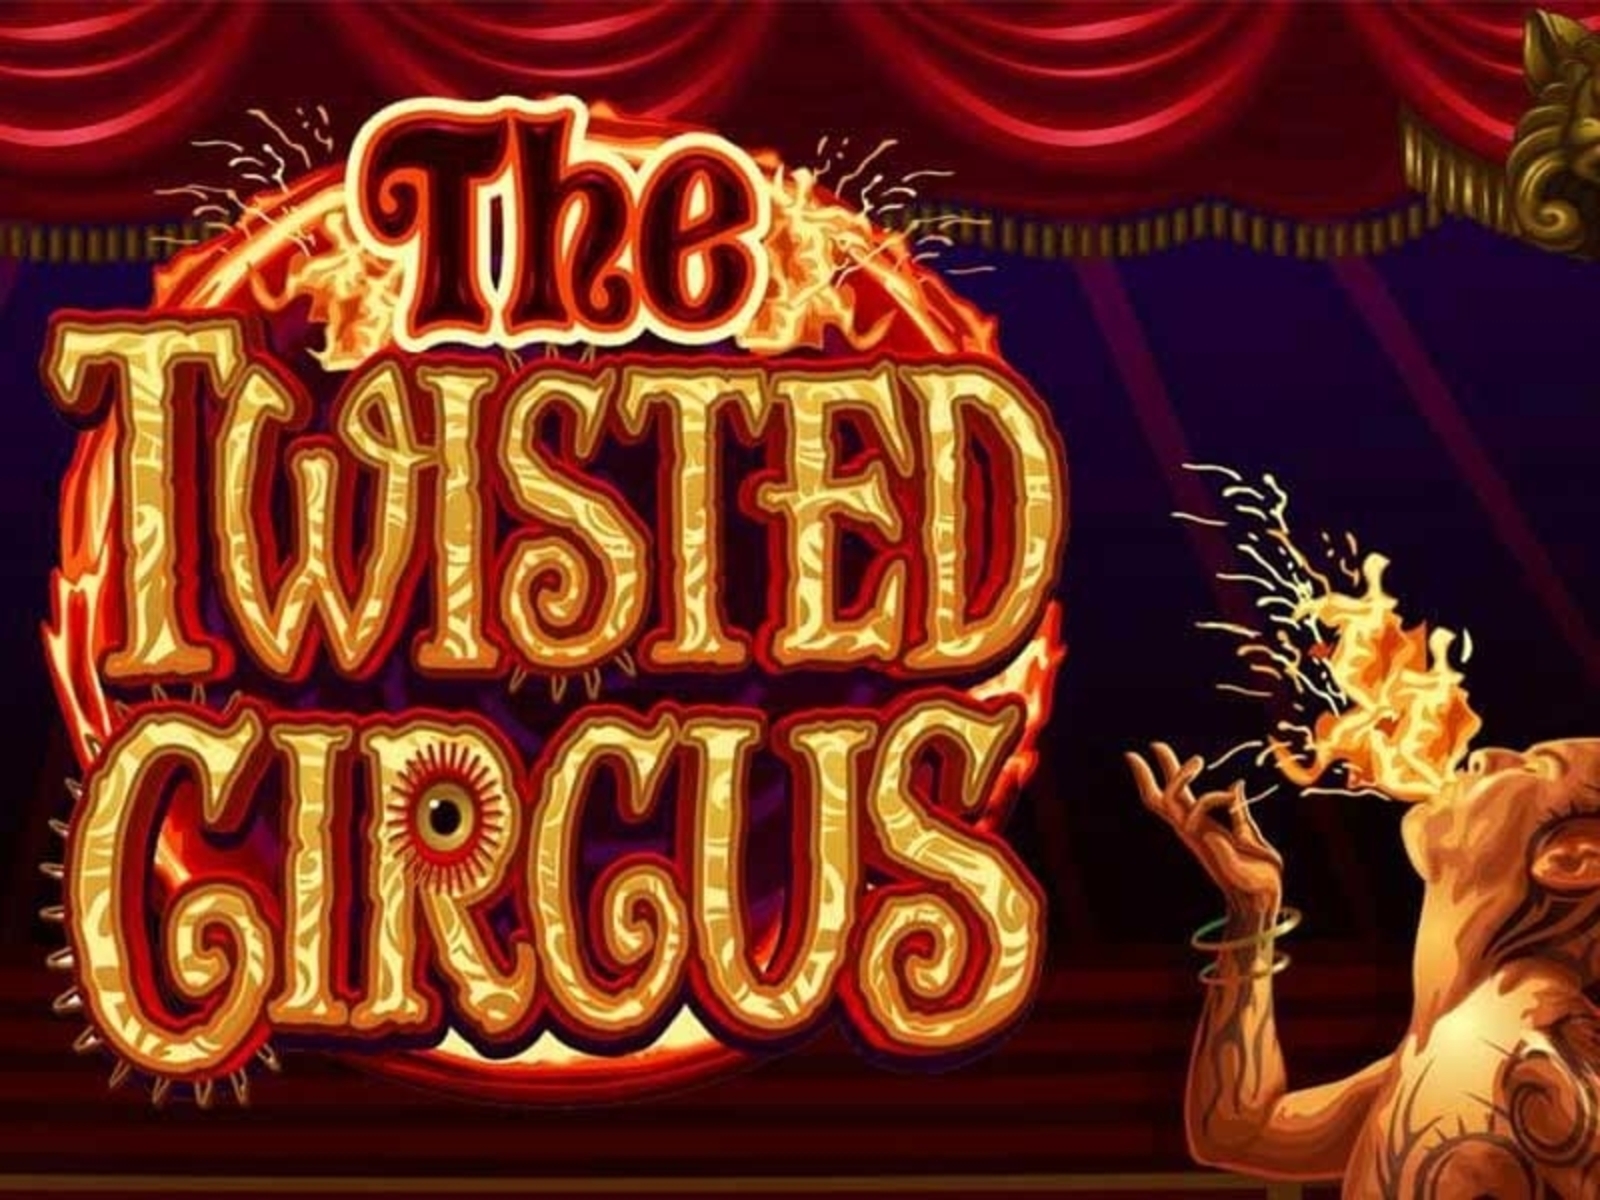 The Twisted Circus demo